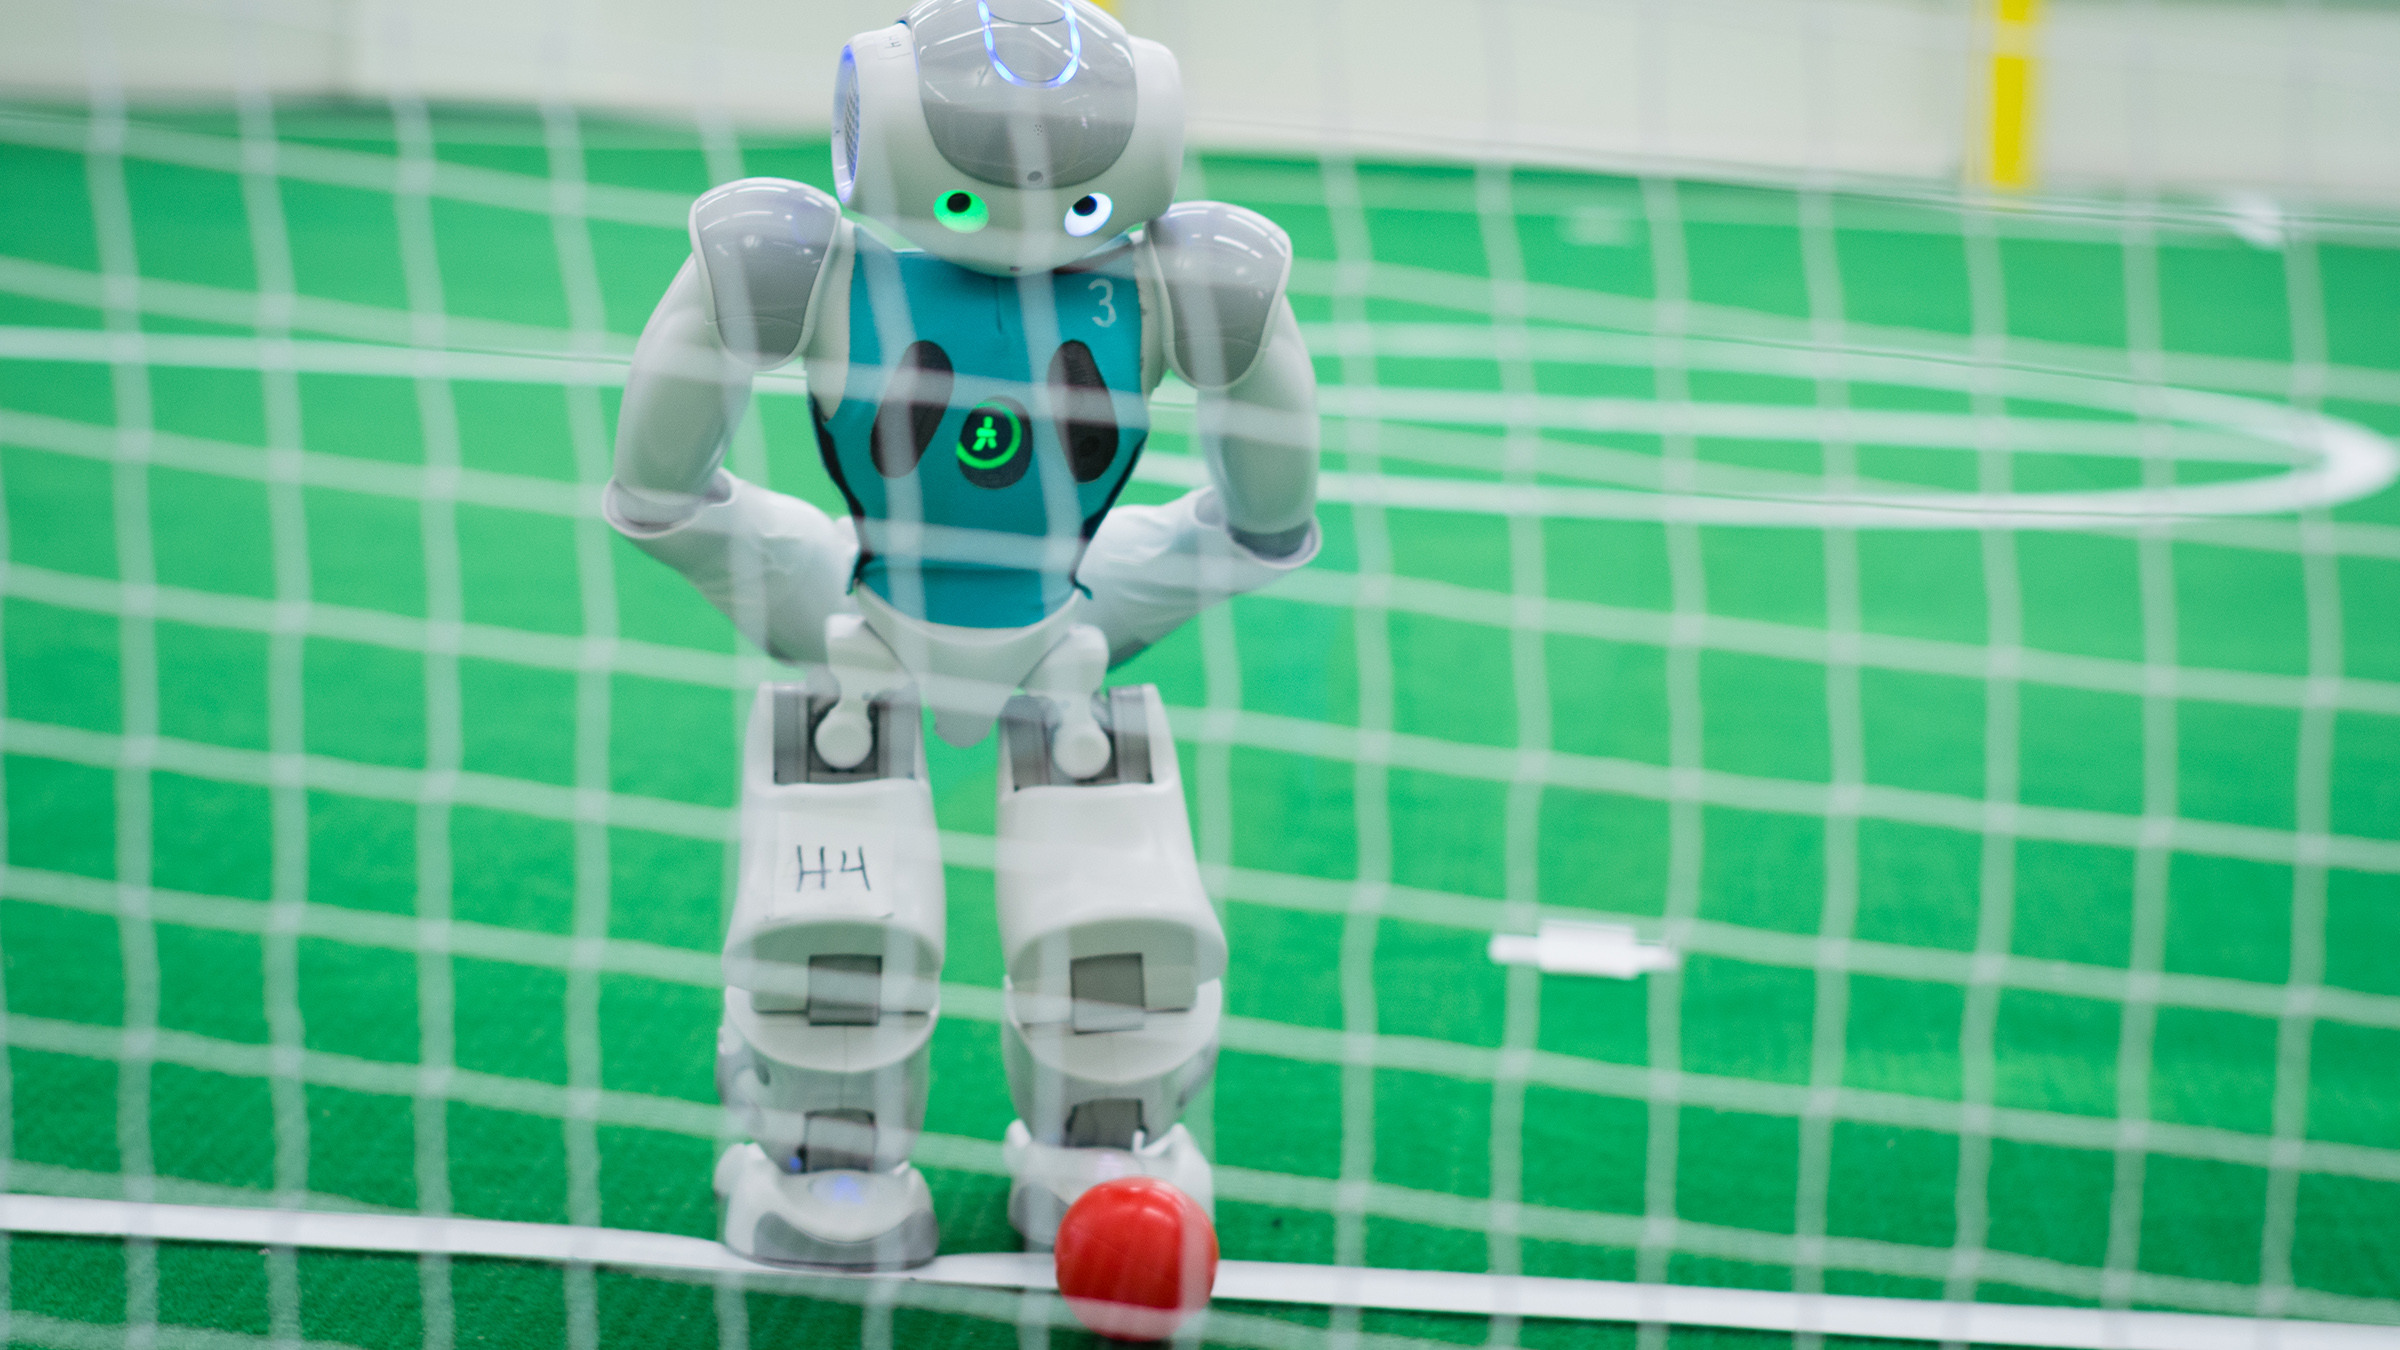 Robot standing on a soccer pitch preparing to kick a red ball into a net